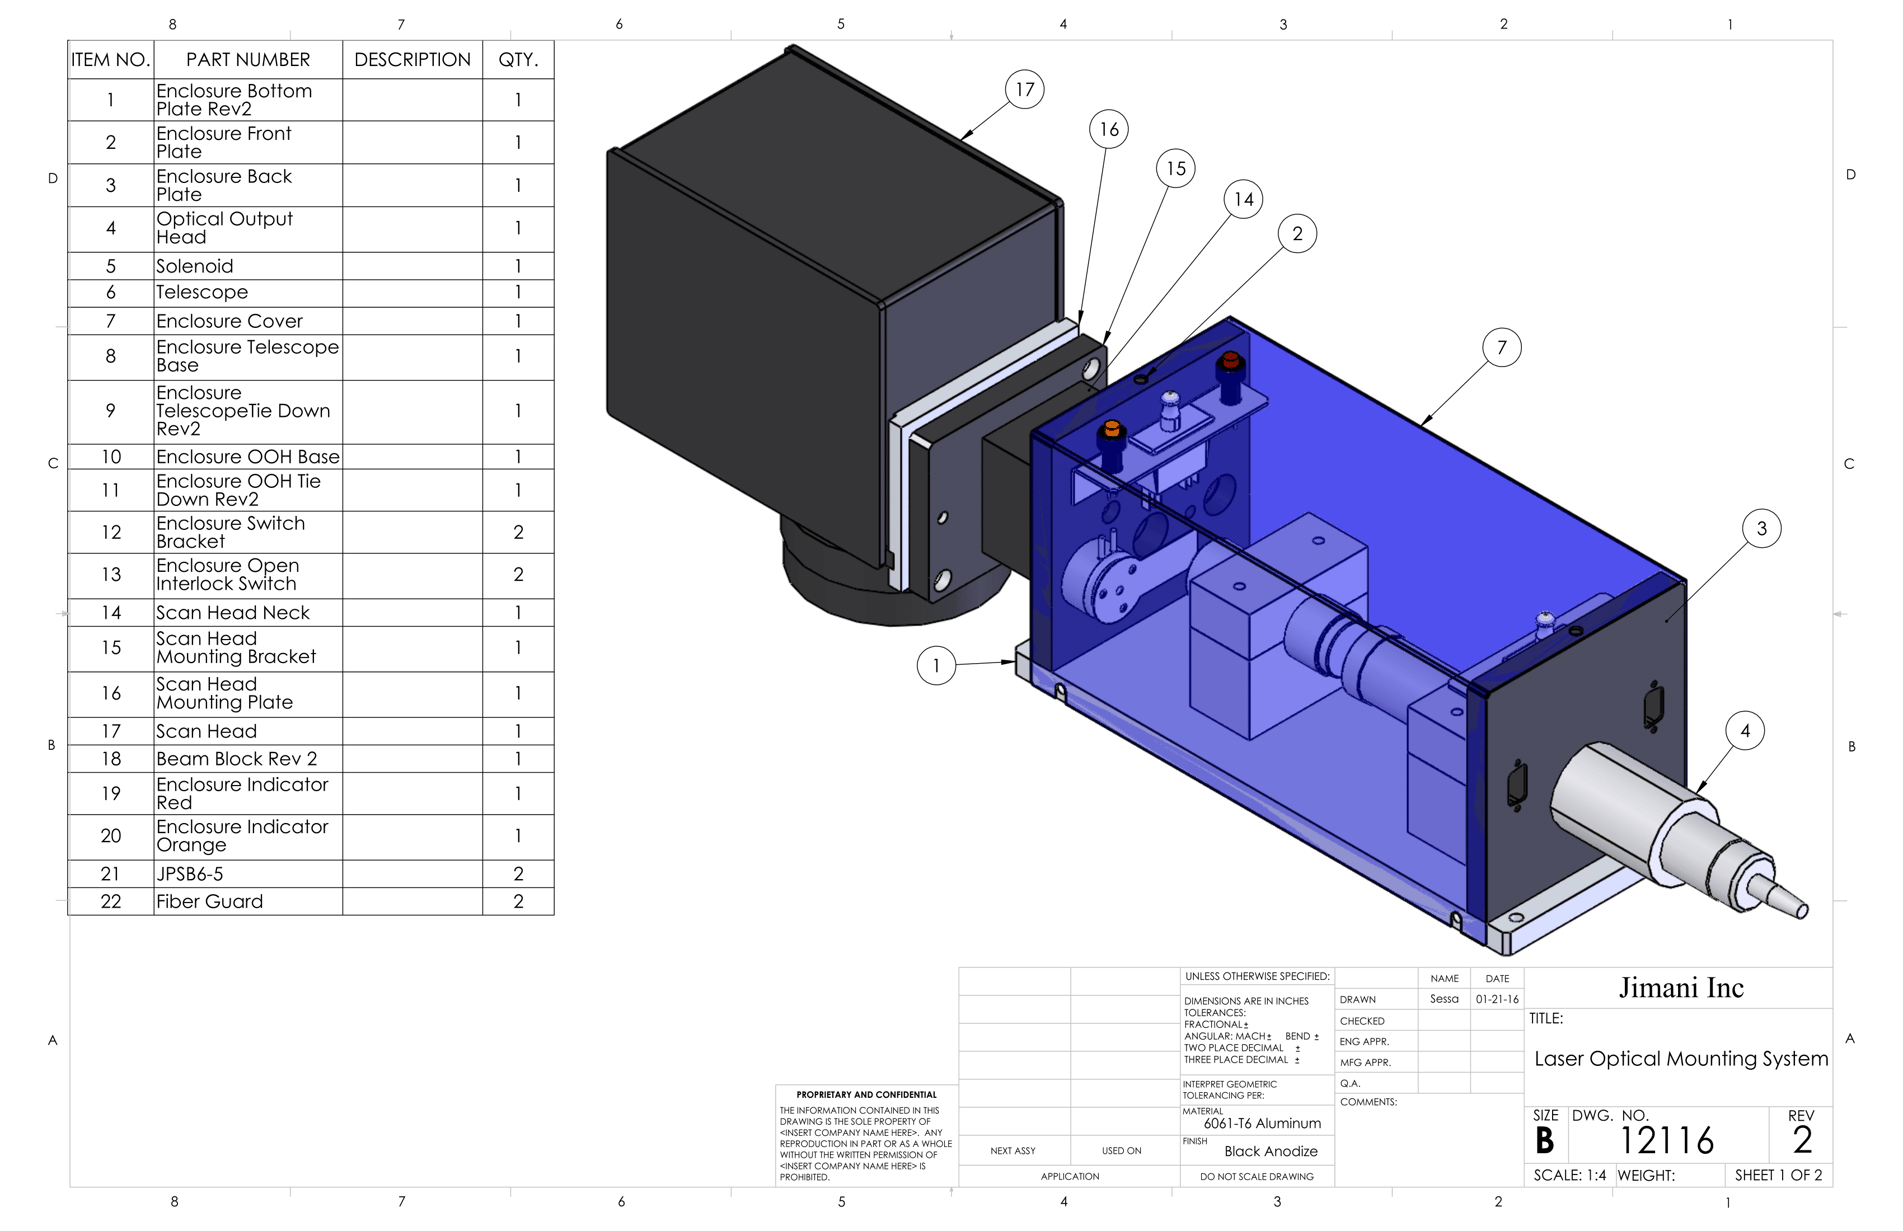 Laser_Optical_Mounting_System-1.png